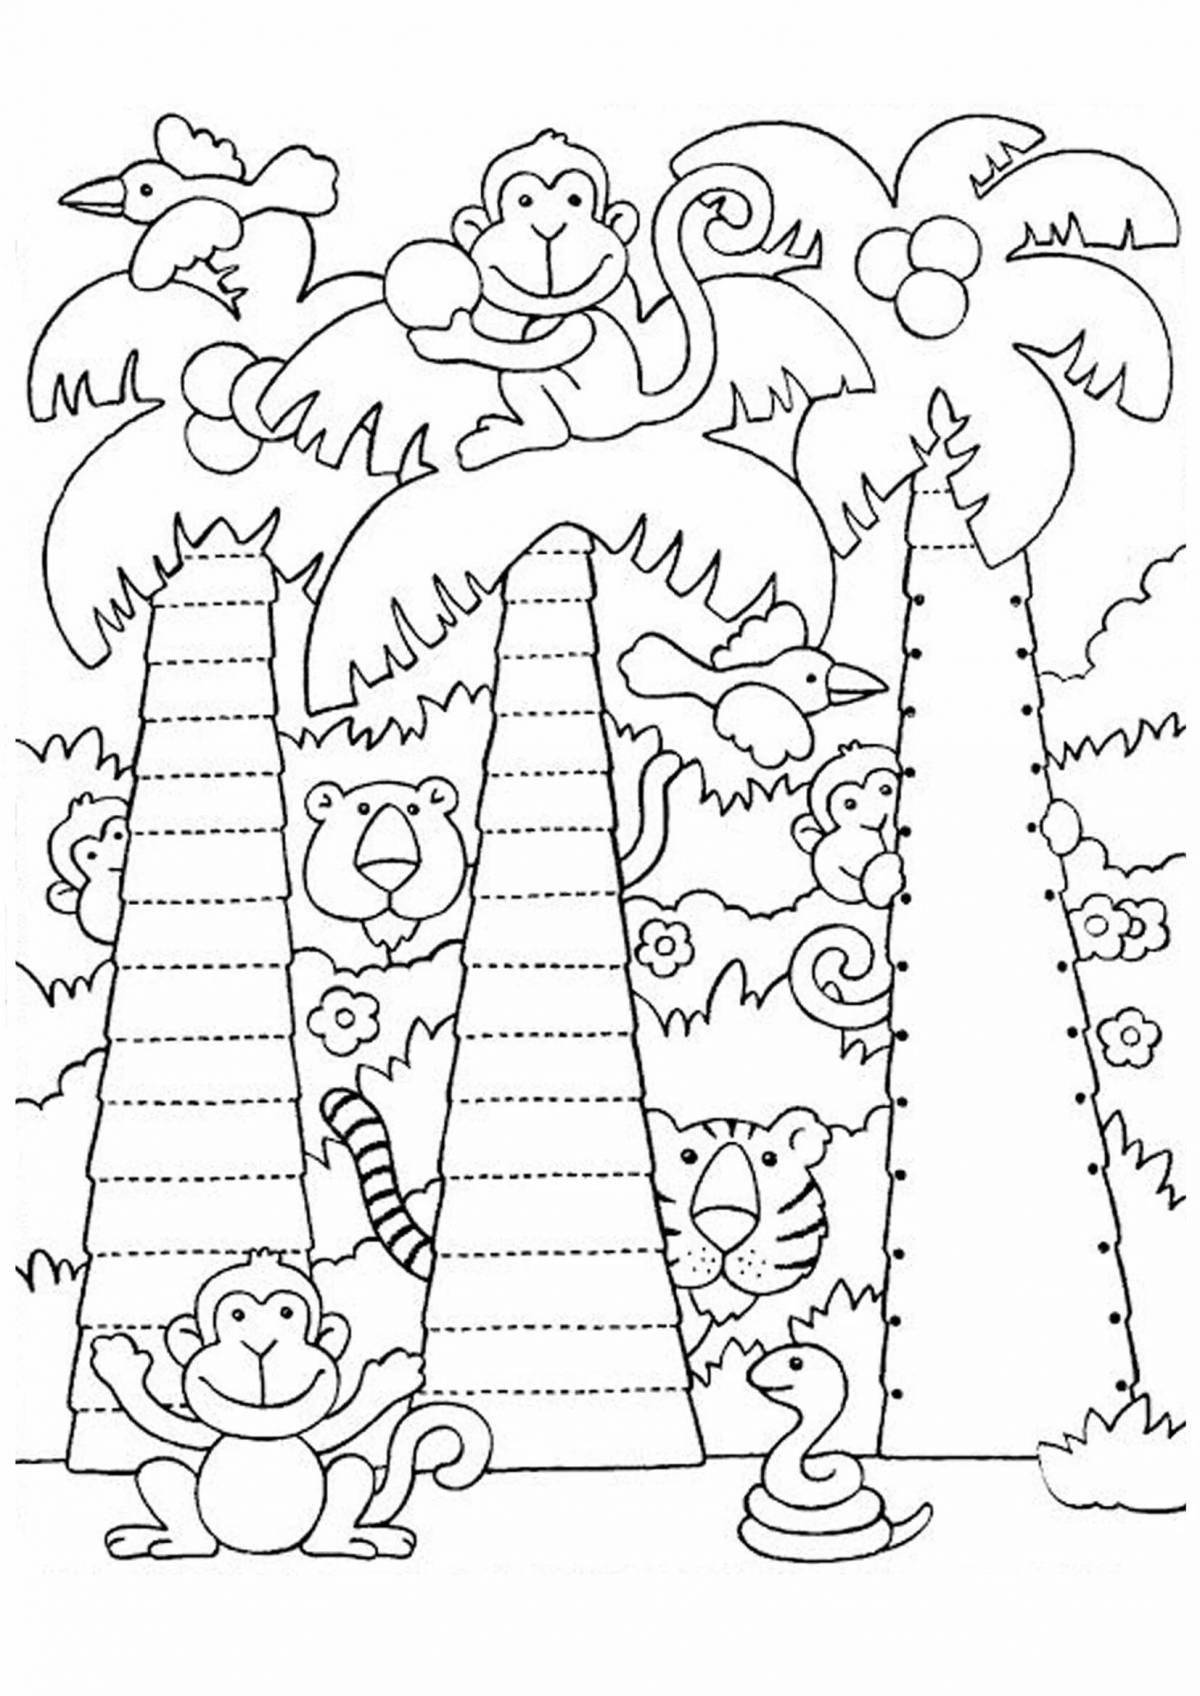 Colorful motor skill coloring page